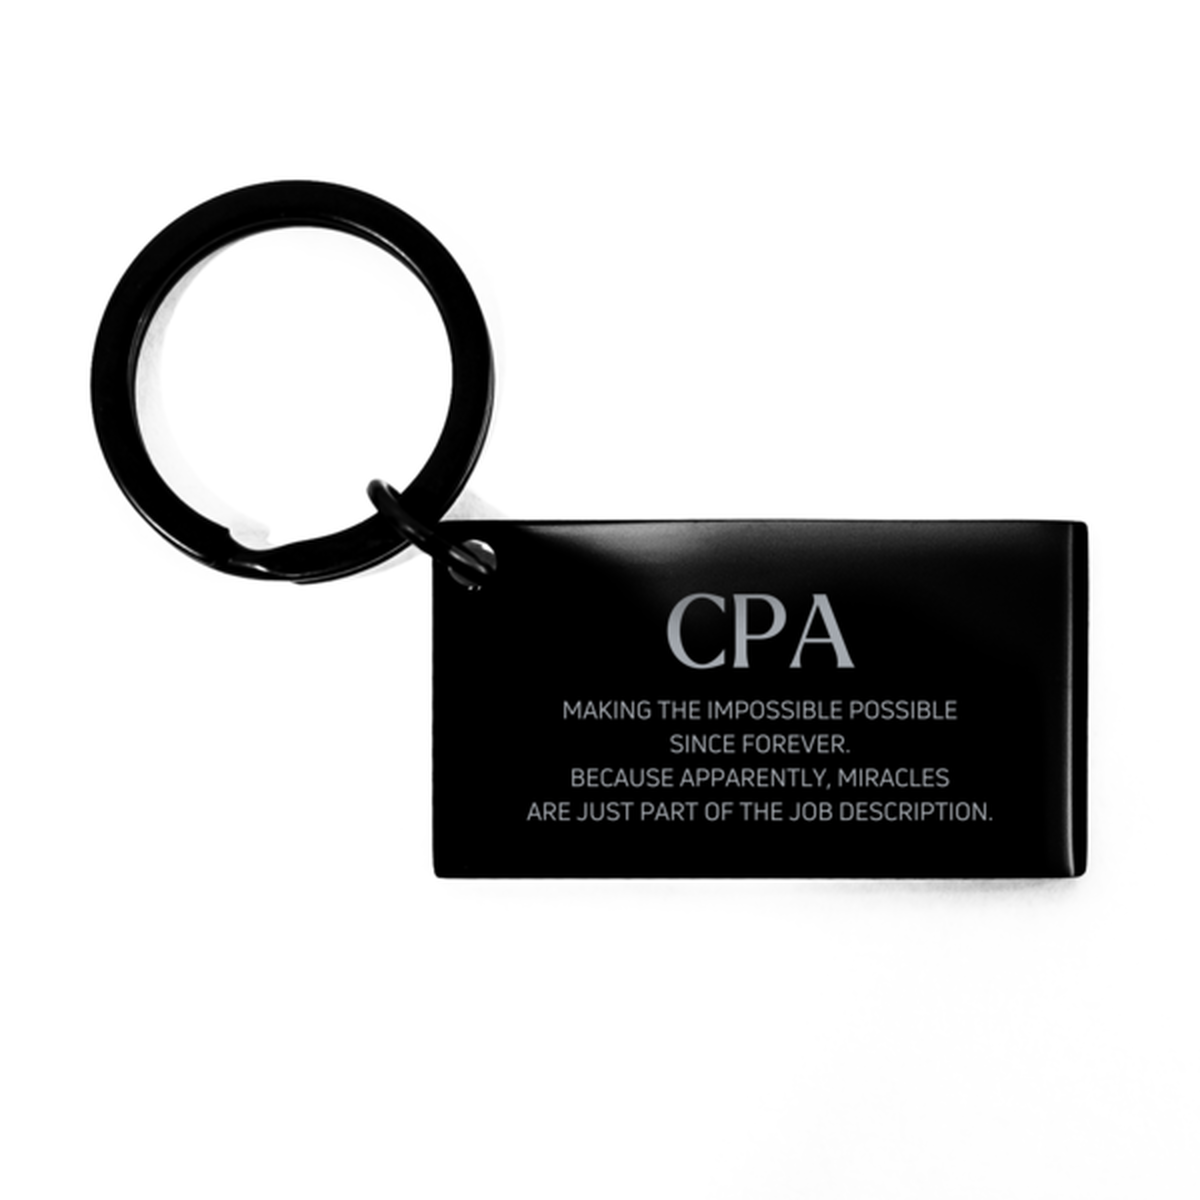 Funny CPA Gifts, Miracles are just part of the job description, Inspirational Birthday Keychain For CPA, Men, Women, Coworkers, Friends, Boss